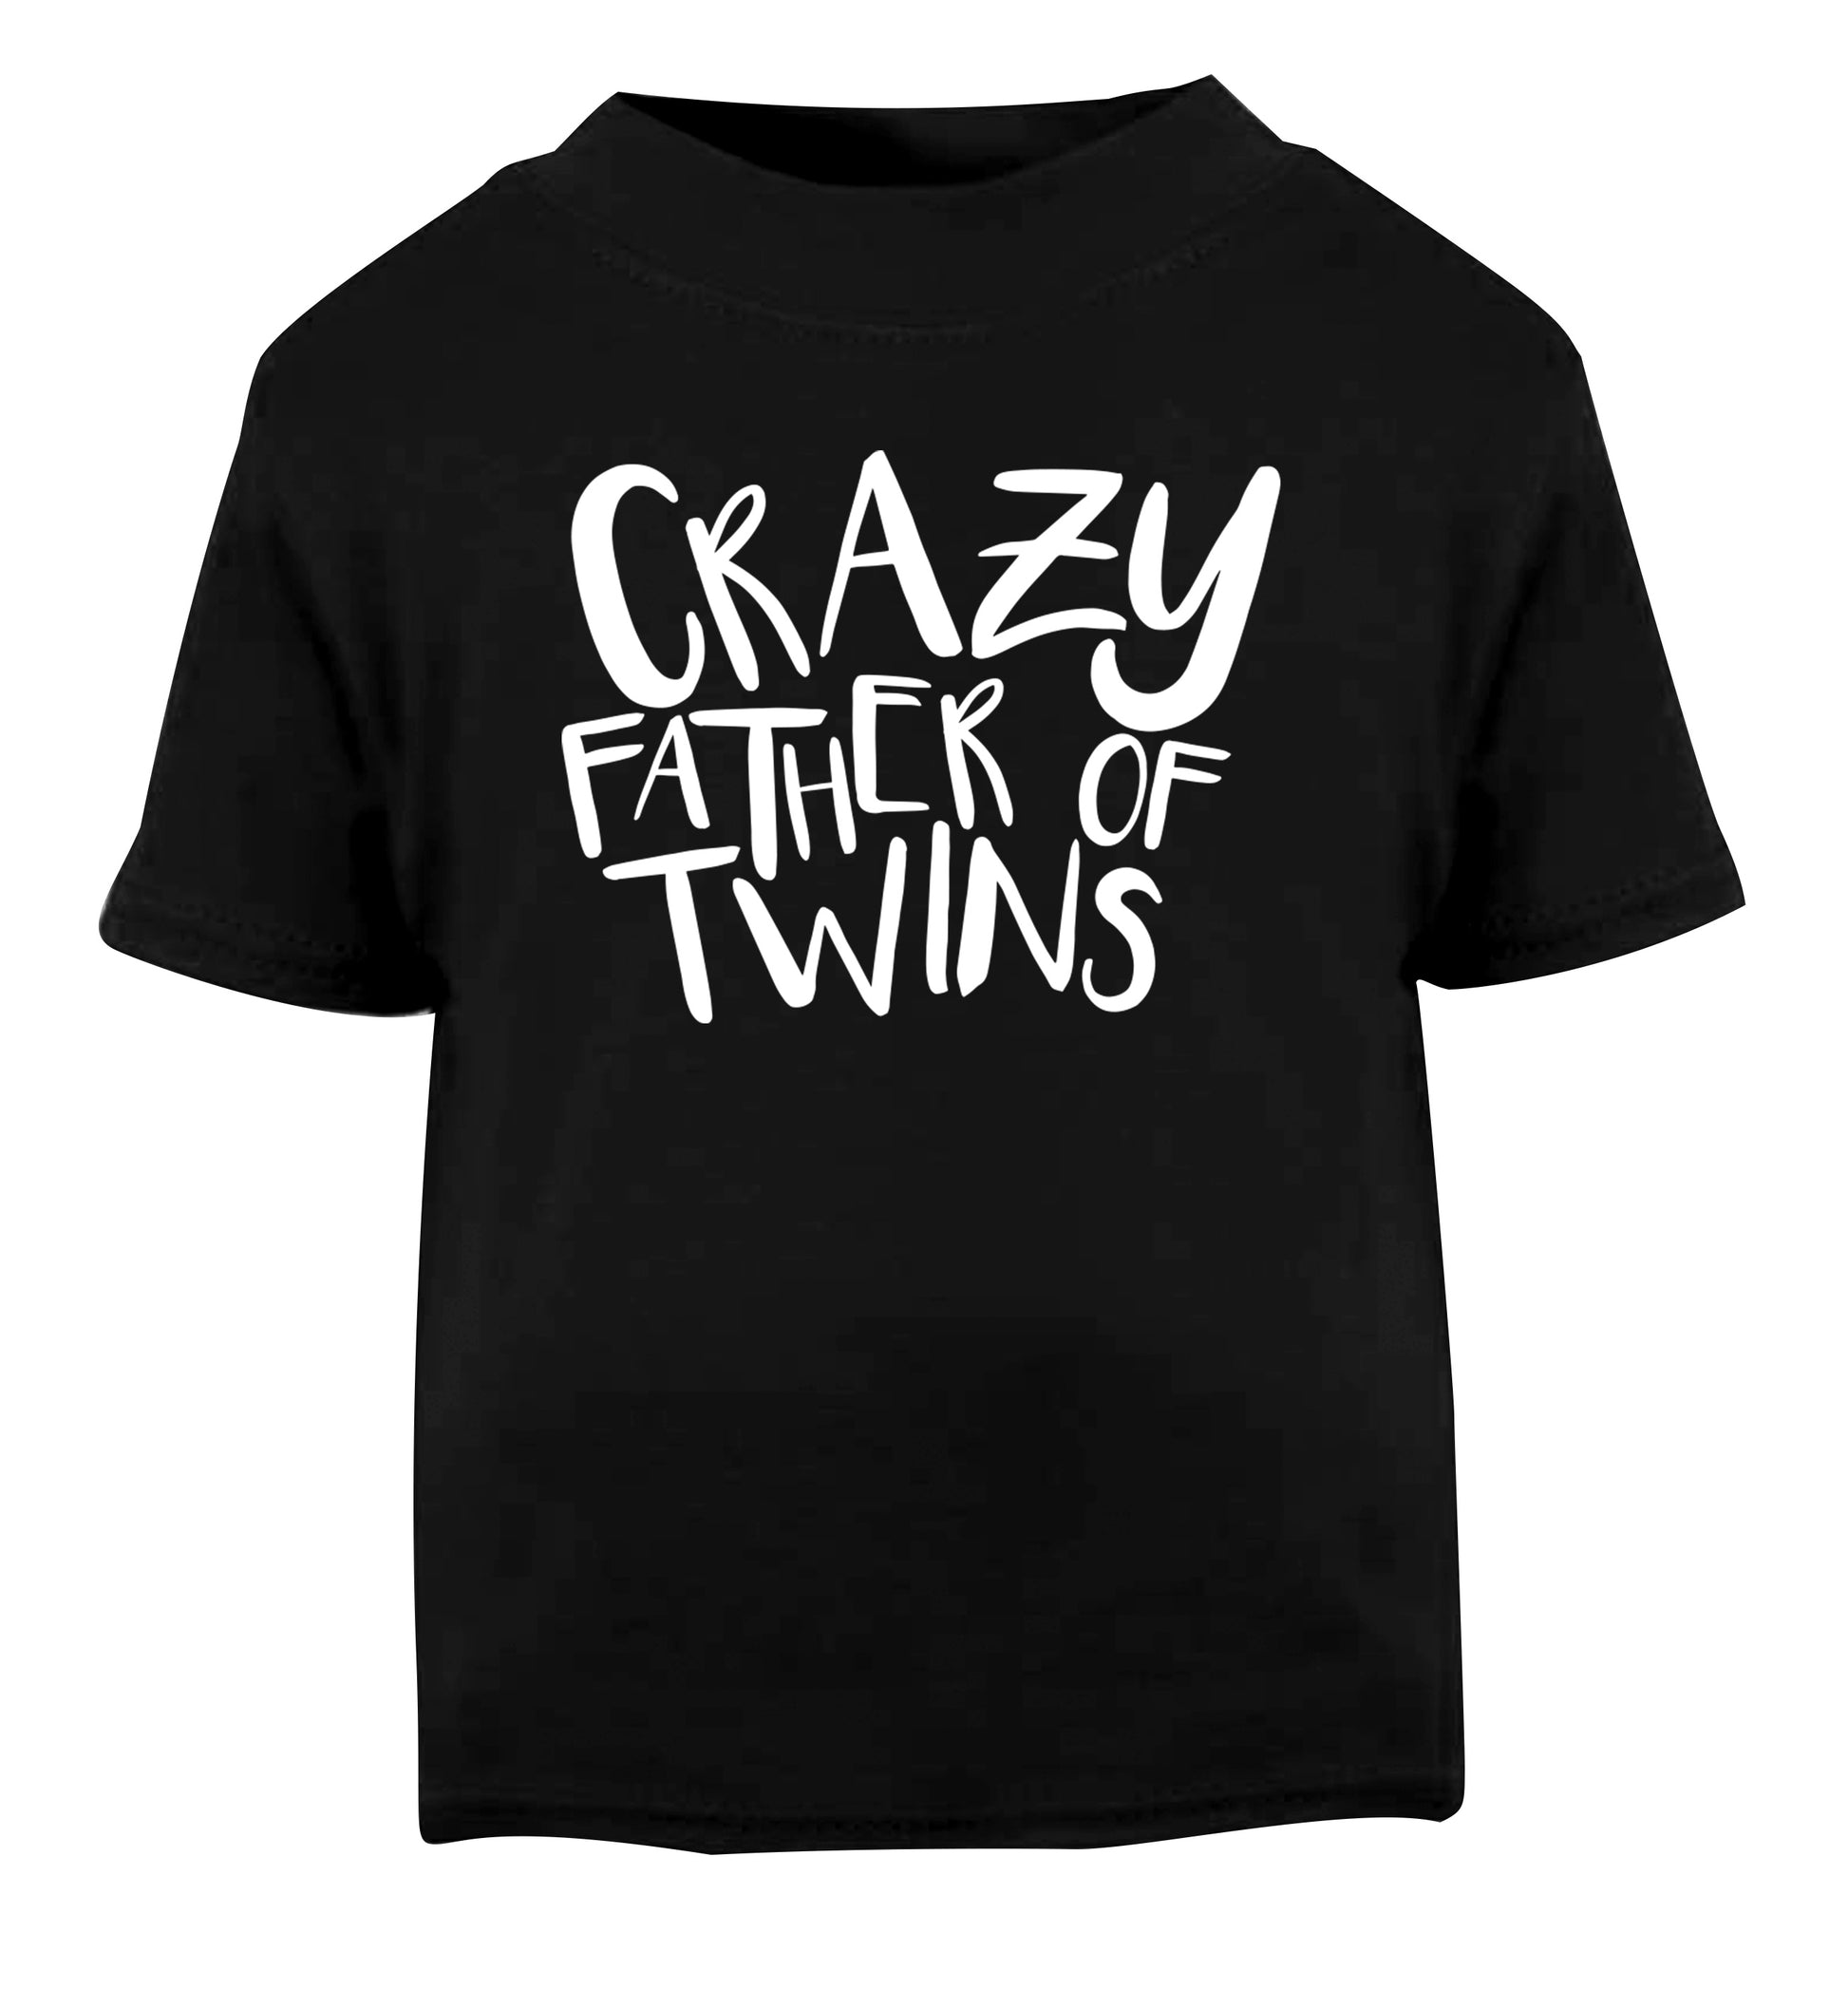 Crazy father of twins Black Baby Toddler Tshirt 2 years